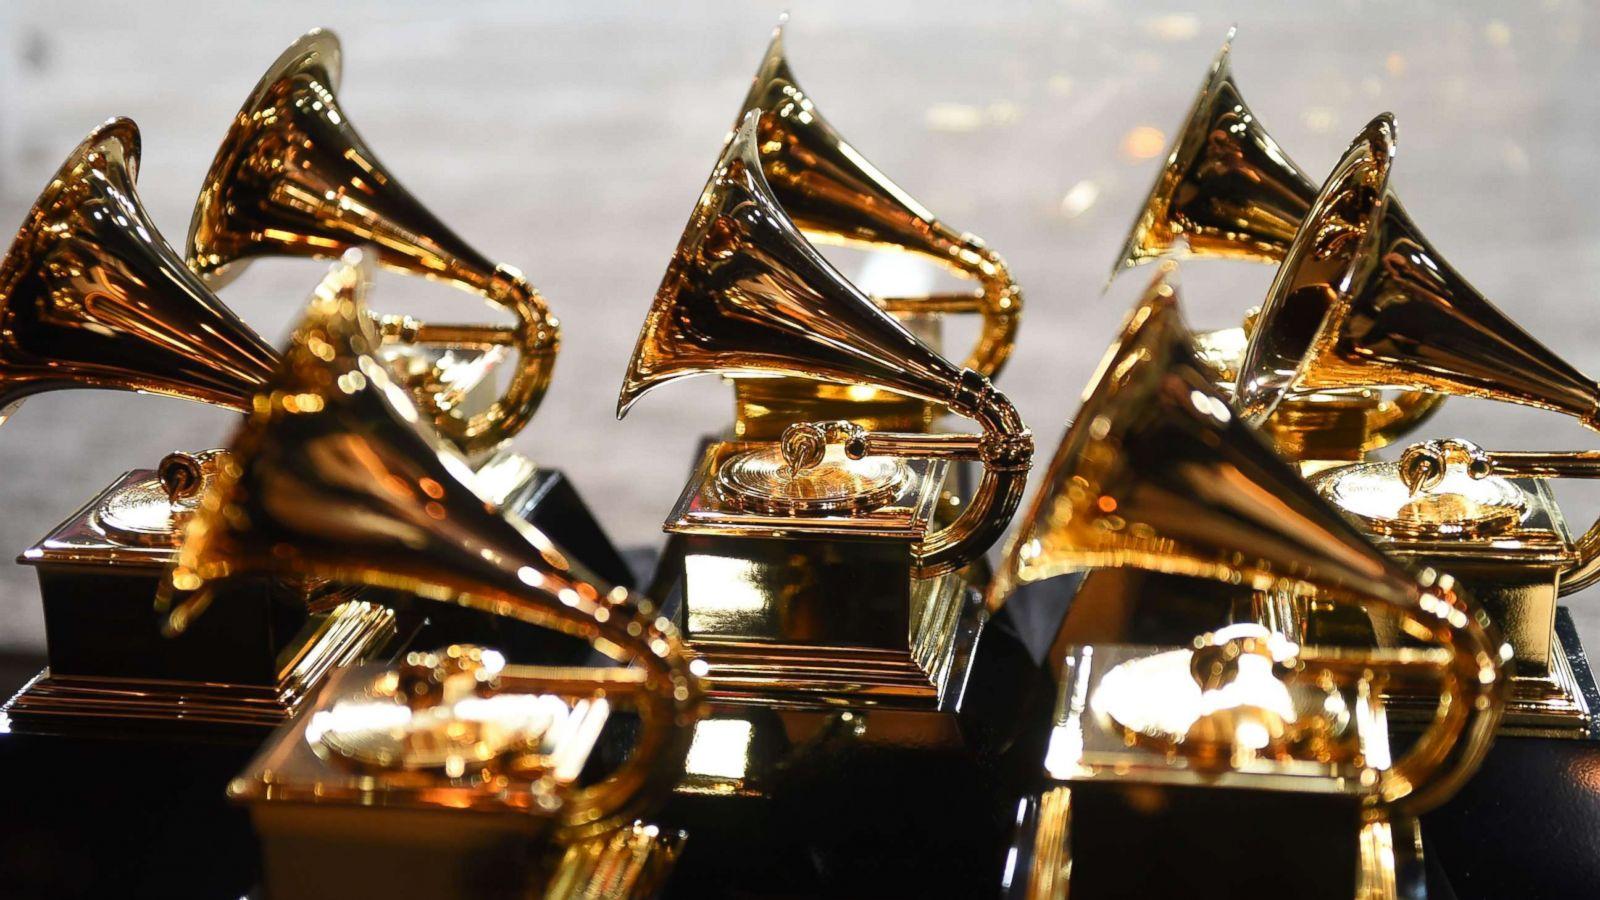 Grammy Award nominations announced: See the full list